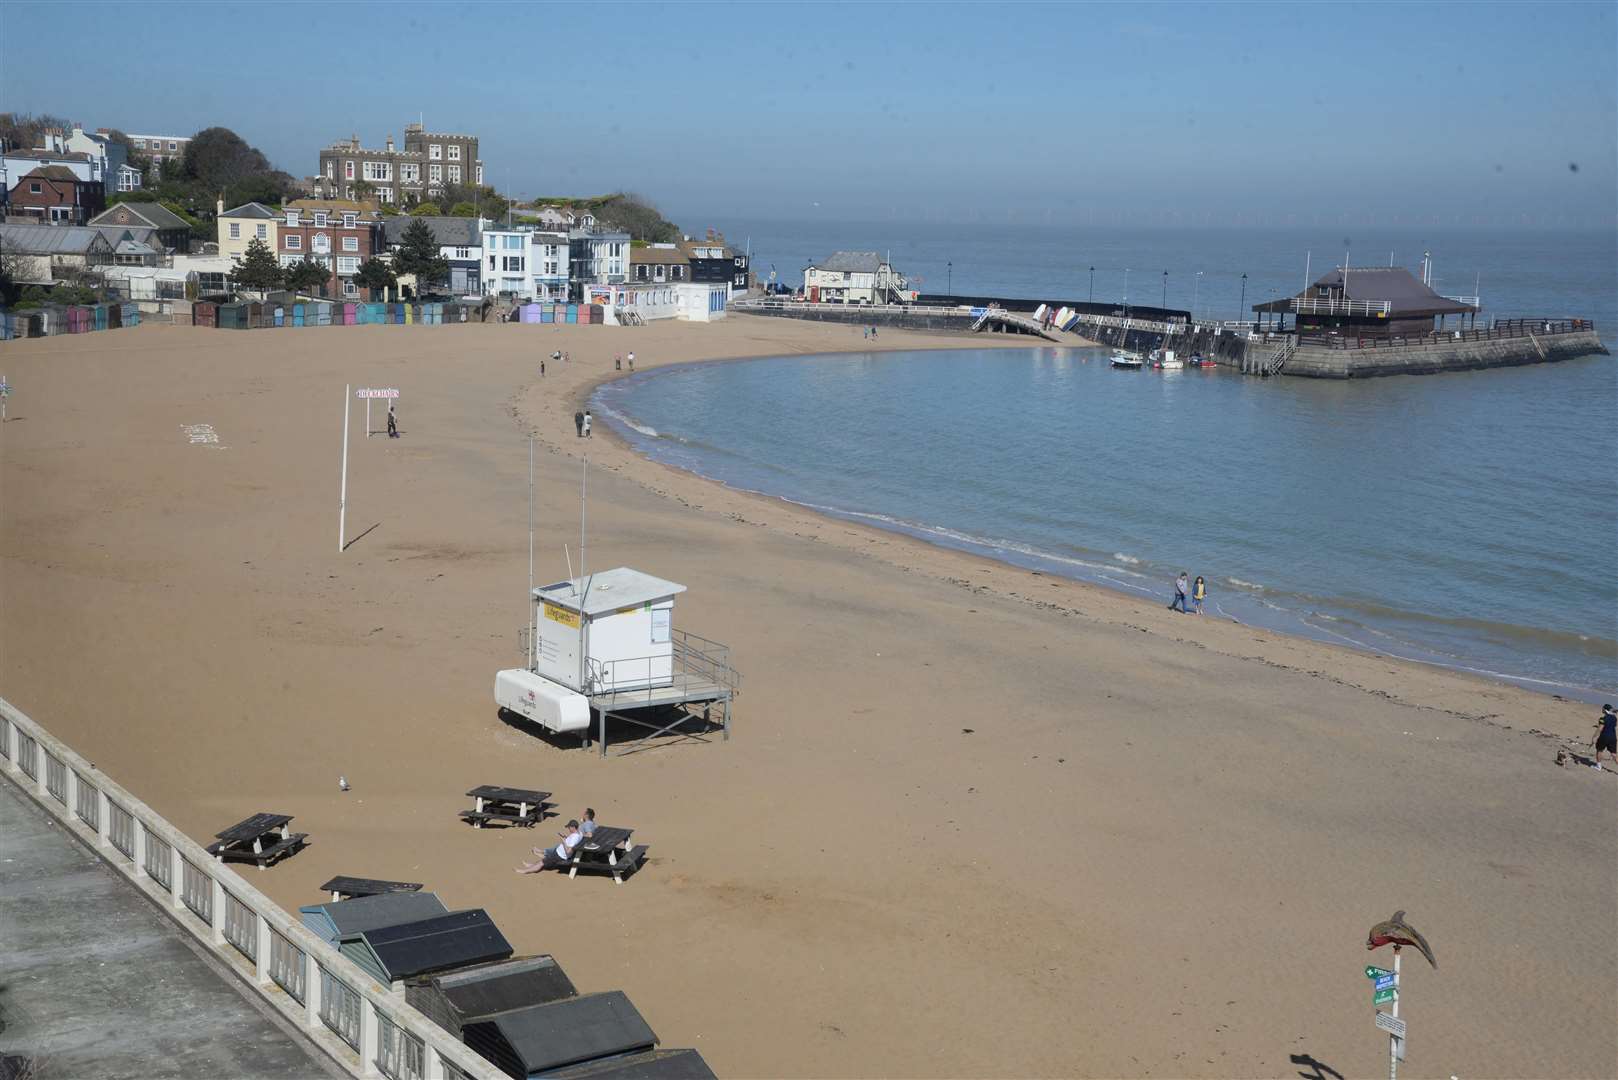 Viking Bay in Broadstairs. Picture: Chris Davey